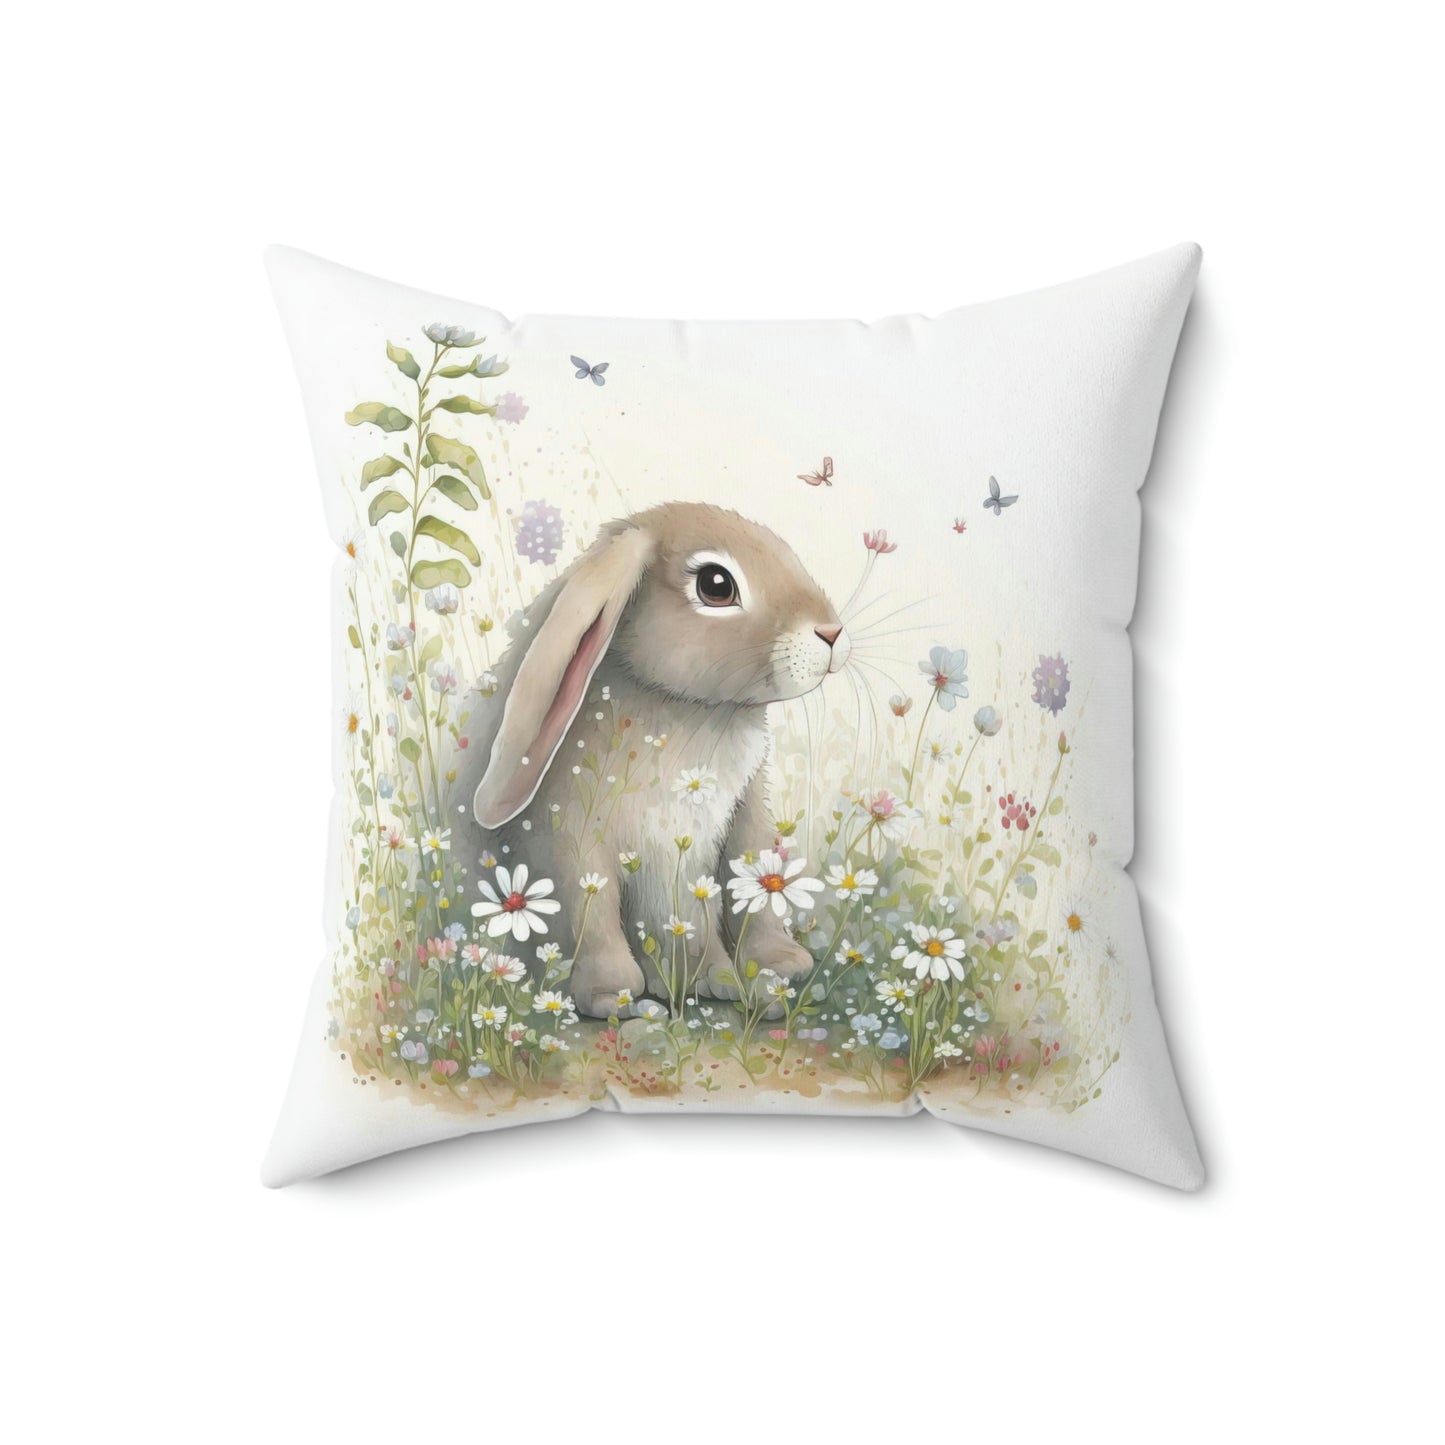 bunny accent throw pillow sitting on a grey couch, floral bunny pattern throw pillow decorating a sofa or arm chair, square bunny pillow decoration for spring